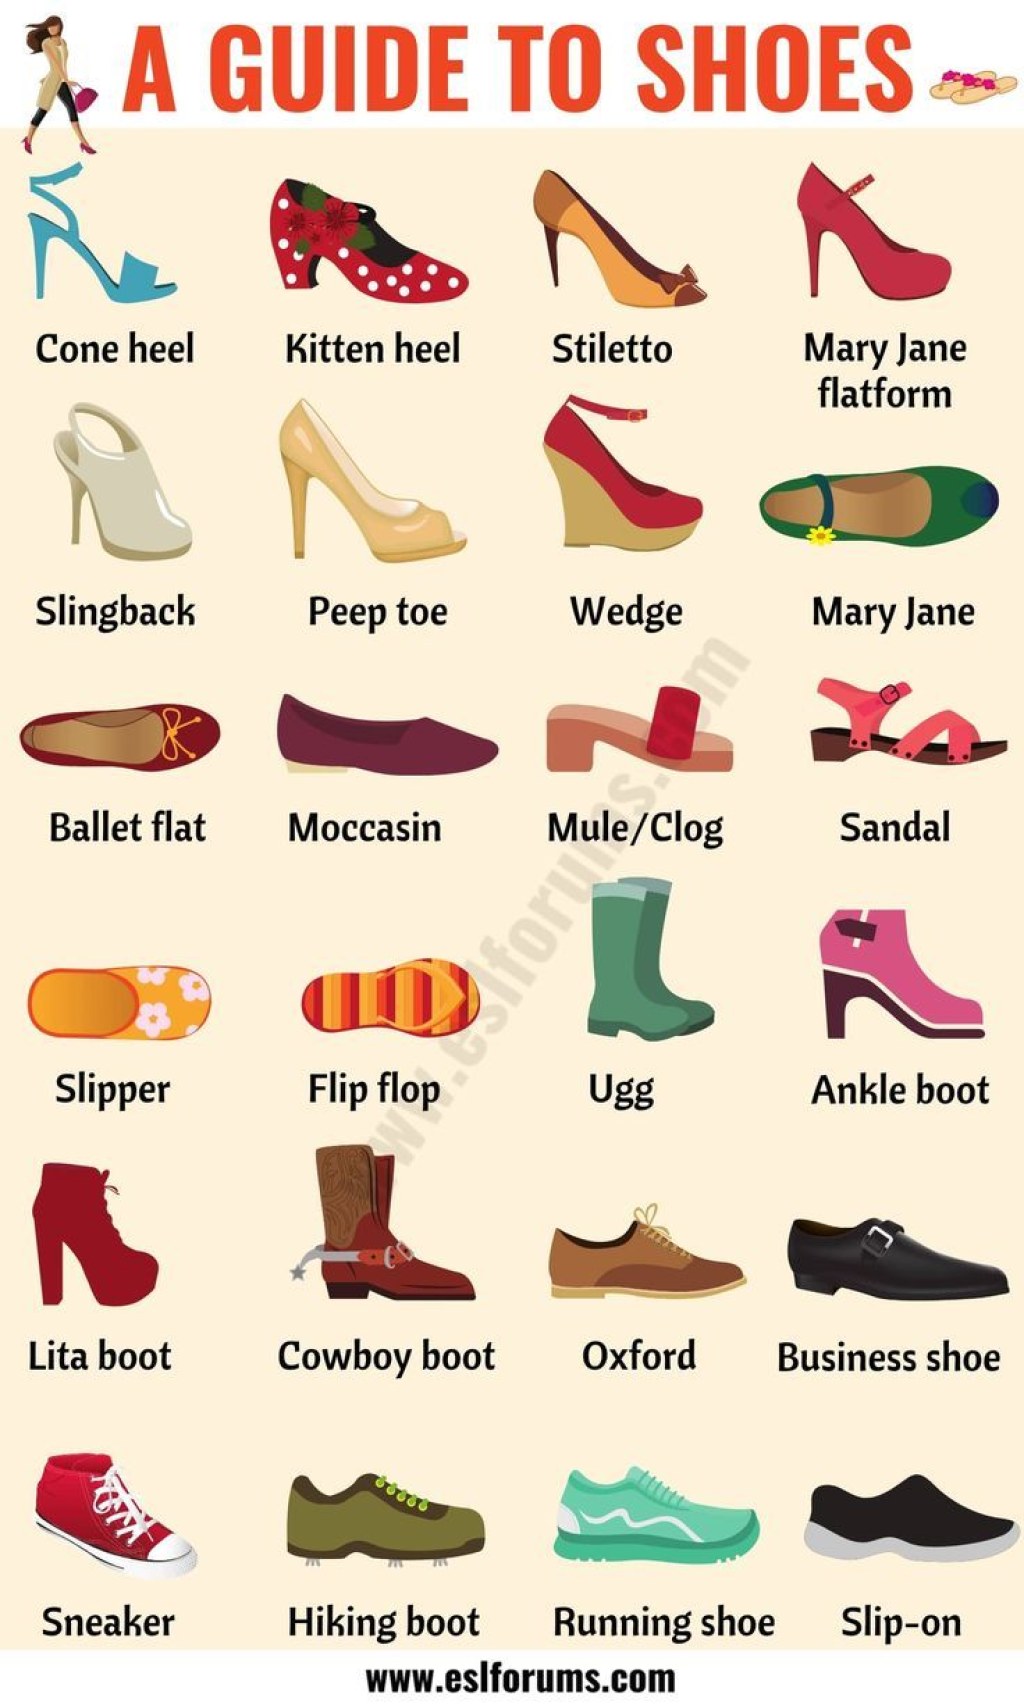 shoe styles - Types of Shoes: Learn Different Shoe Styles with Pictures - ESL